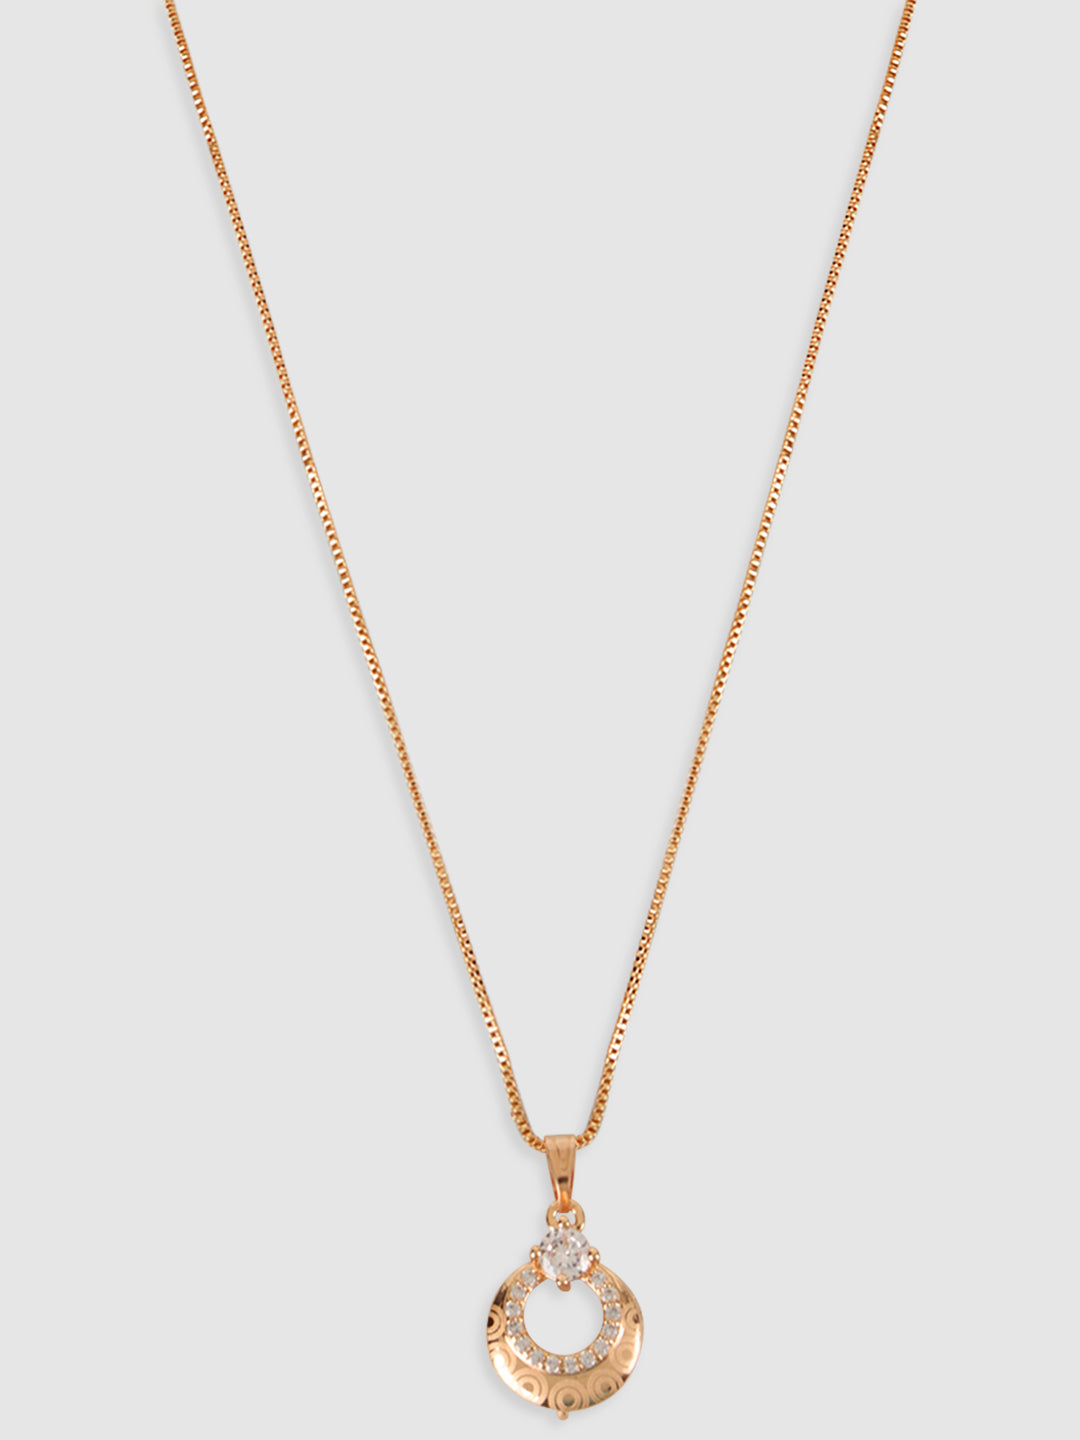 Gold-Plated & White Pendant With Chain